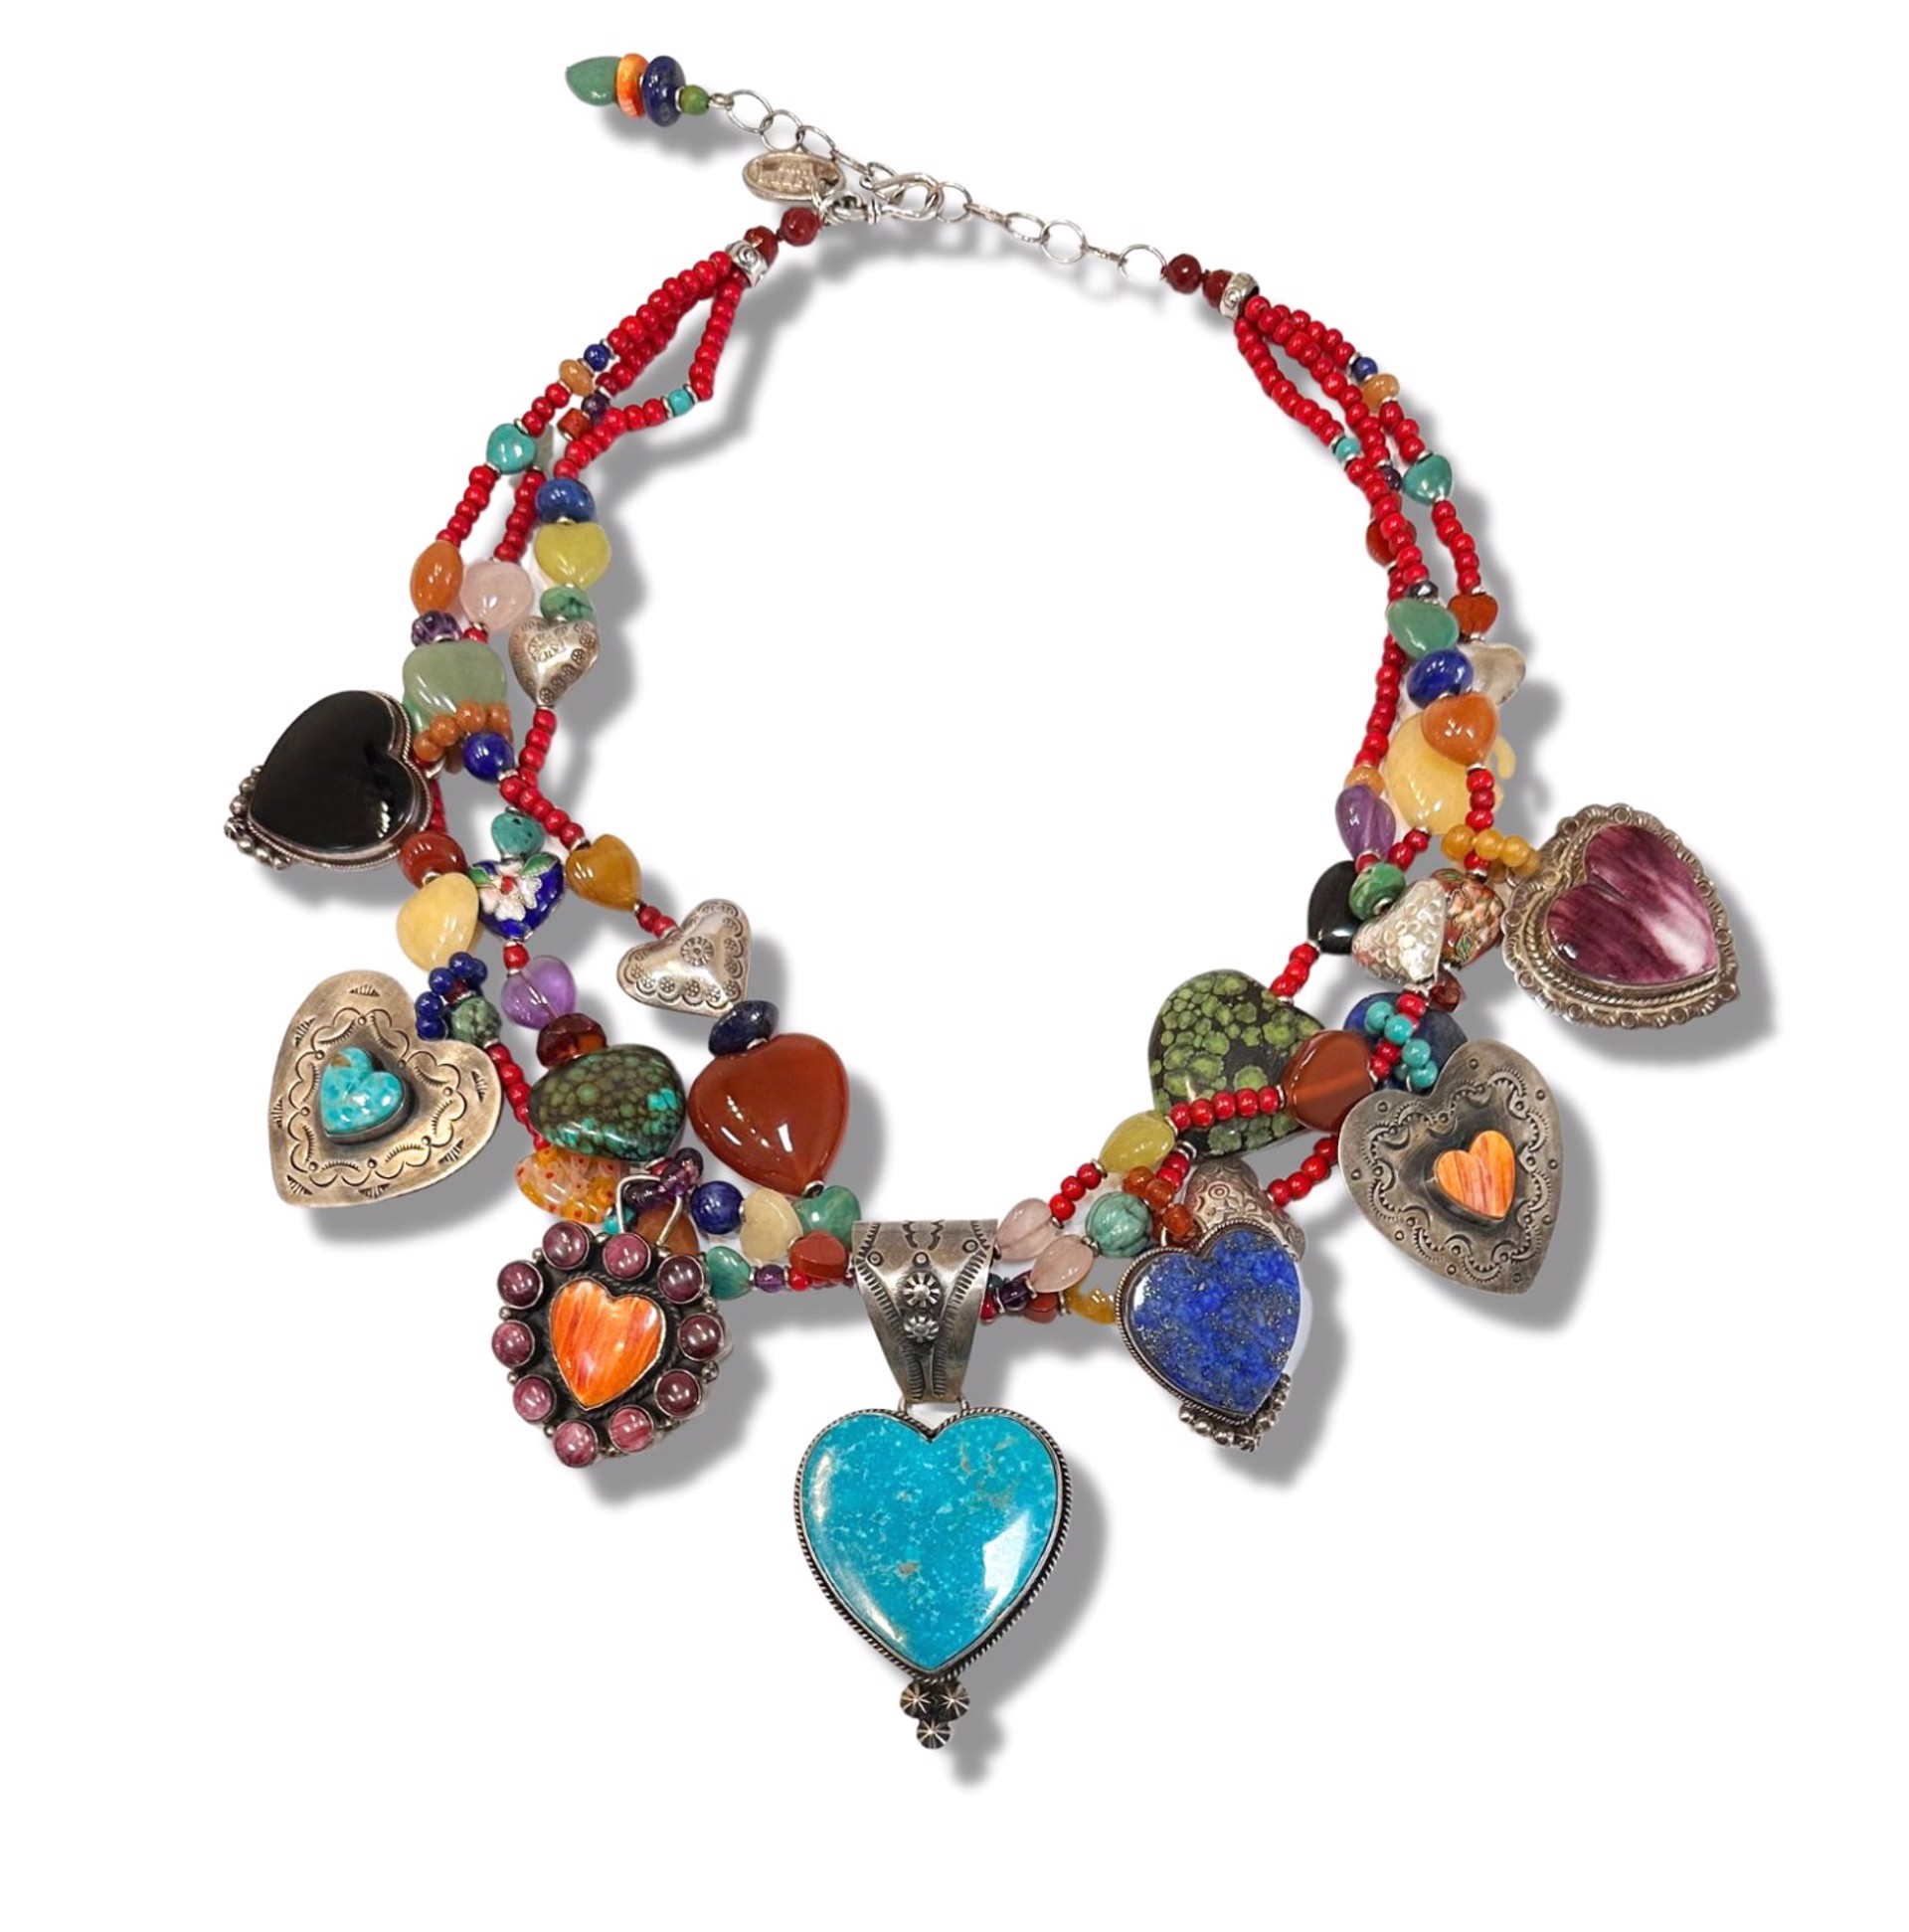 Necklace - 3 Strand Multi Color Hearts with Turquoise Pendant set in Sterling #111 by Kim Yubeta